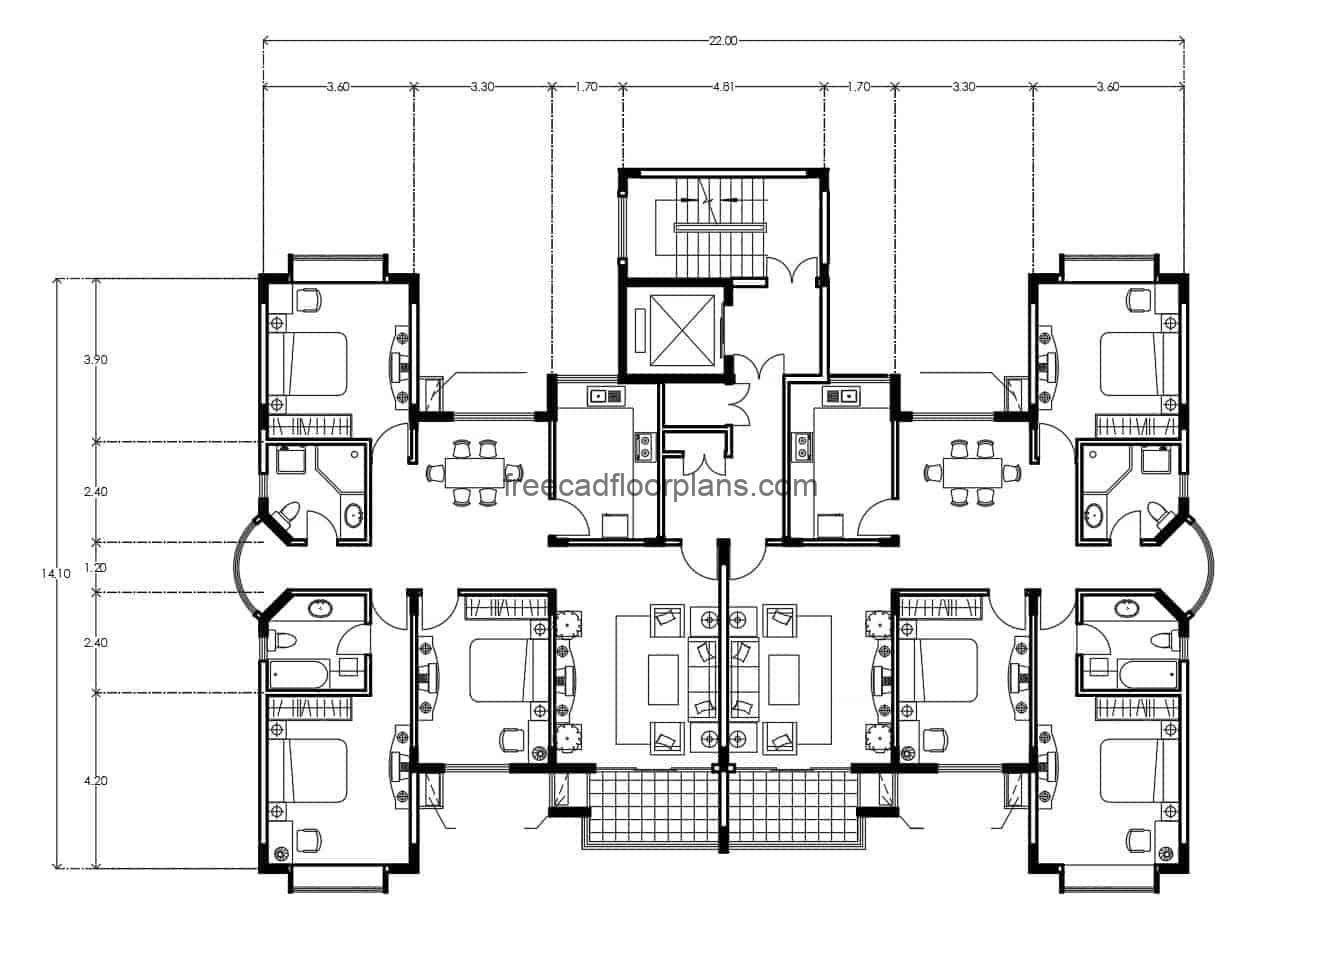 Residential building plan for free download in autocad drawing, architectural plan with autocad blocks and dimensional plan